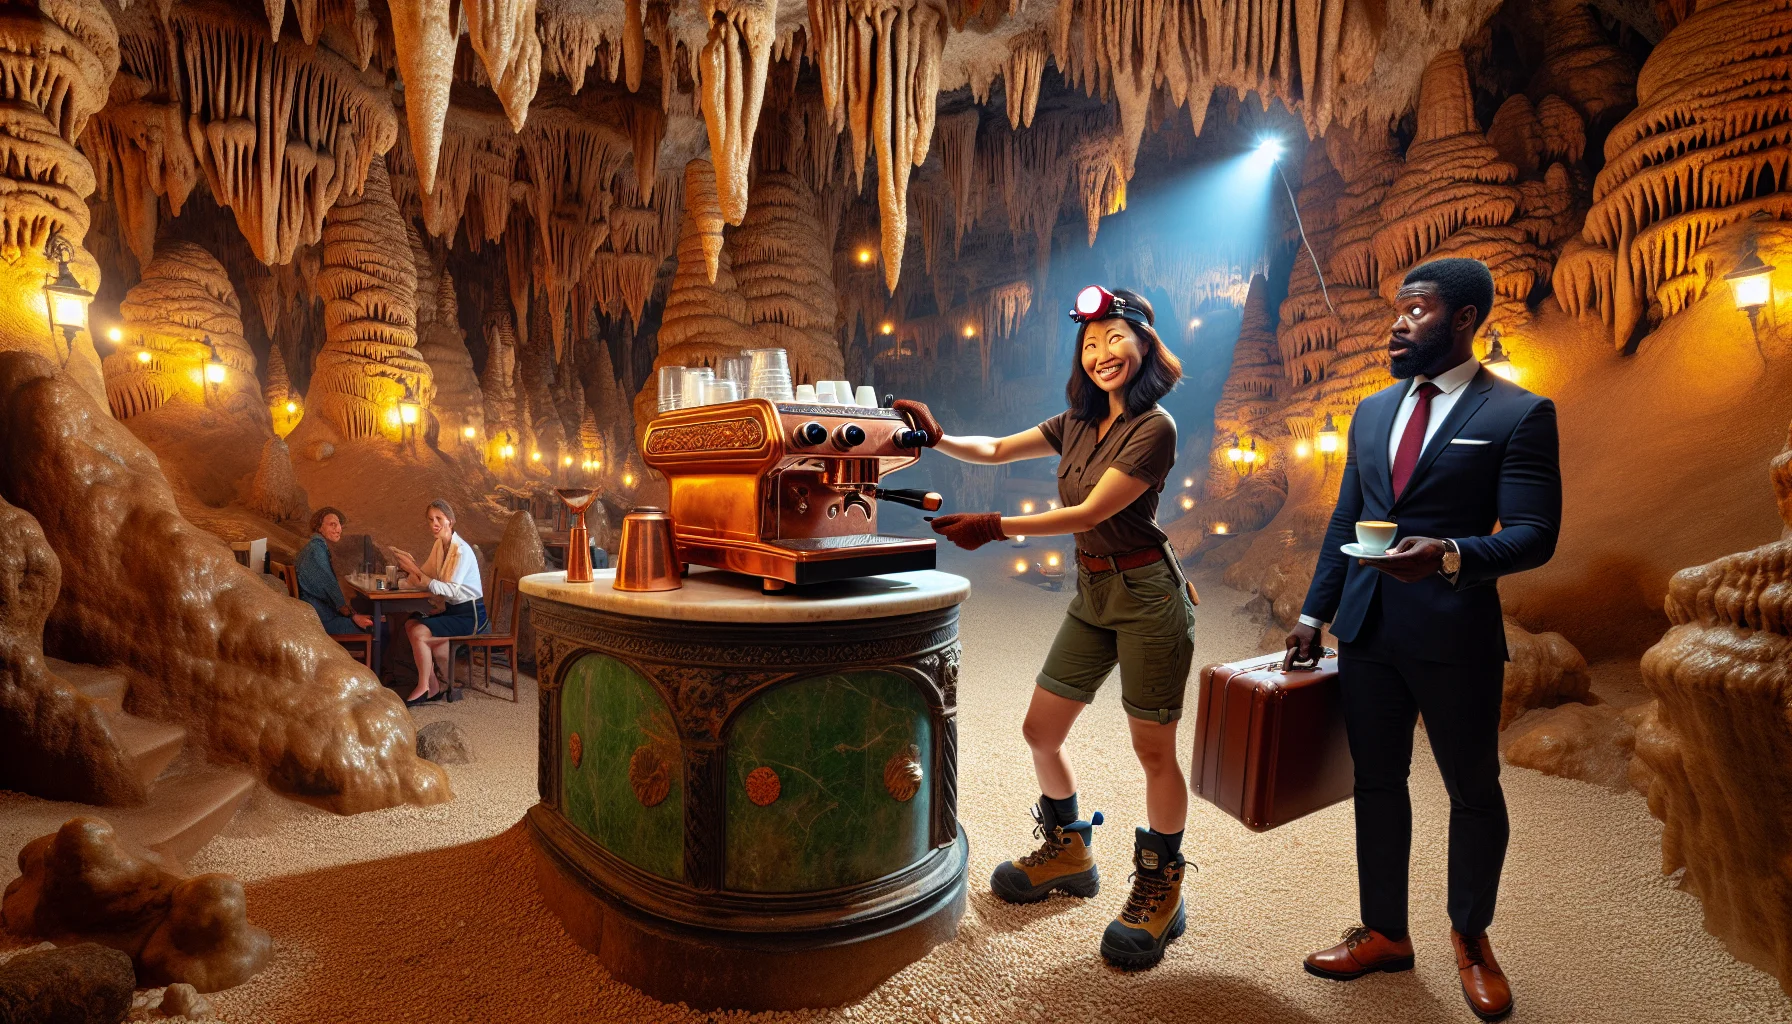 Immerse yourself in a unique and humorous scene unfolding underground. Enter a Byzantine-style cavern, boasting natural stalagmites and stalactites, lit by a warm glow of hanging lanterns. In the heart of the grotto, a South Asian female barista deftly handles an antique copper espresso machine, her smile bright and inviting. Bemusement arises from her casual attire of hiking gear and a headlamp, contrasting with the sophisticated atmosphere. Nearby, a surprised black male customer, clad in his business suit and clutching his briefcase, curiously observes his coffee being prepared in such novel setting.